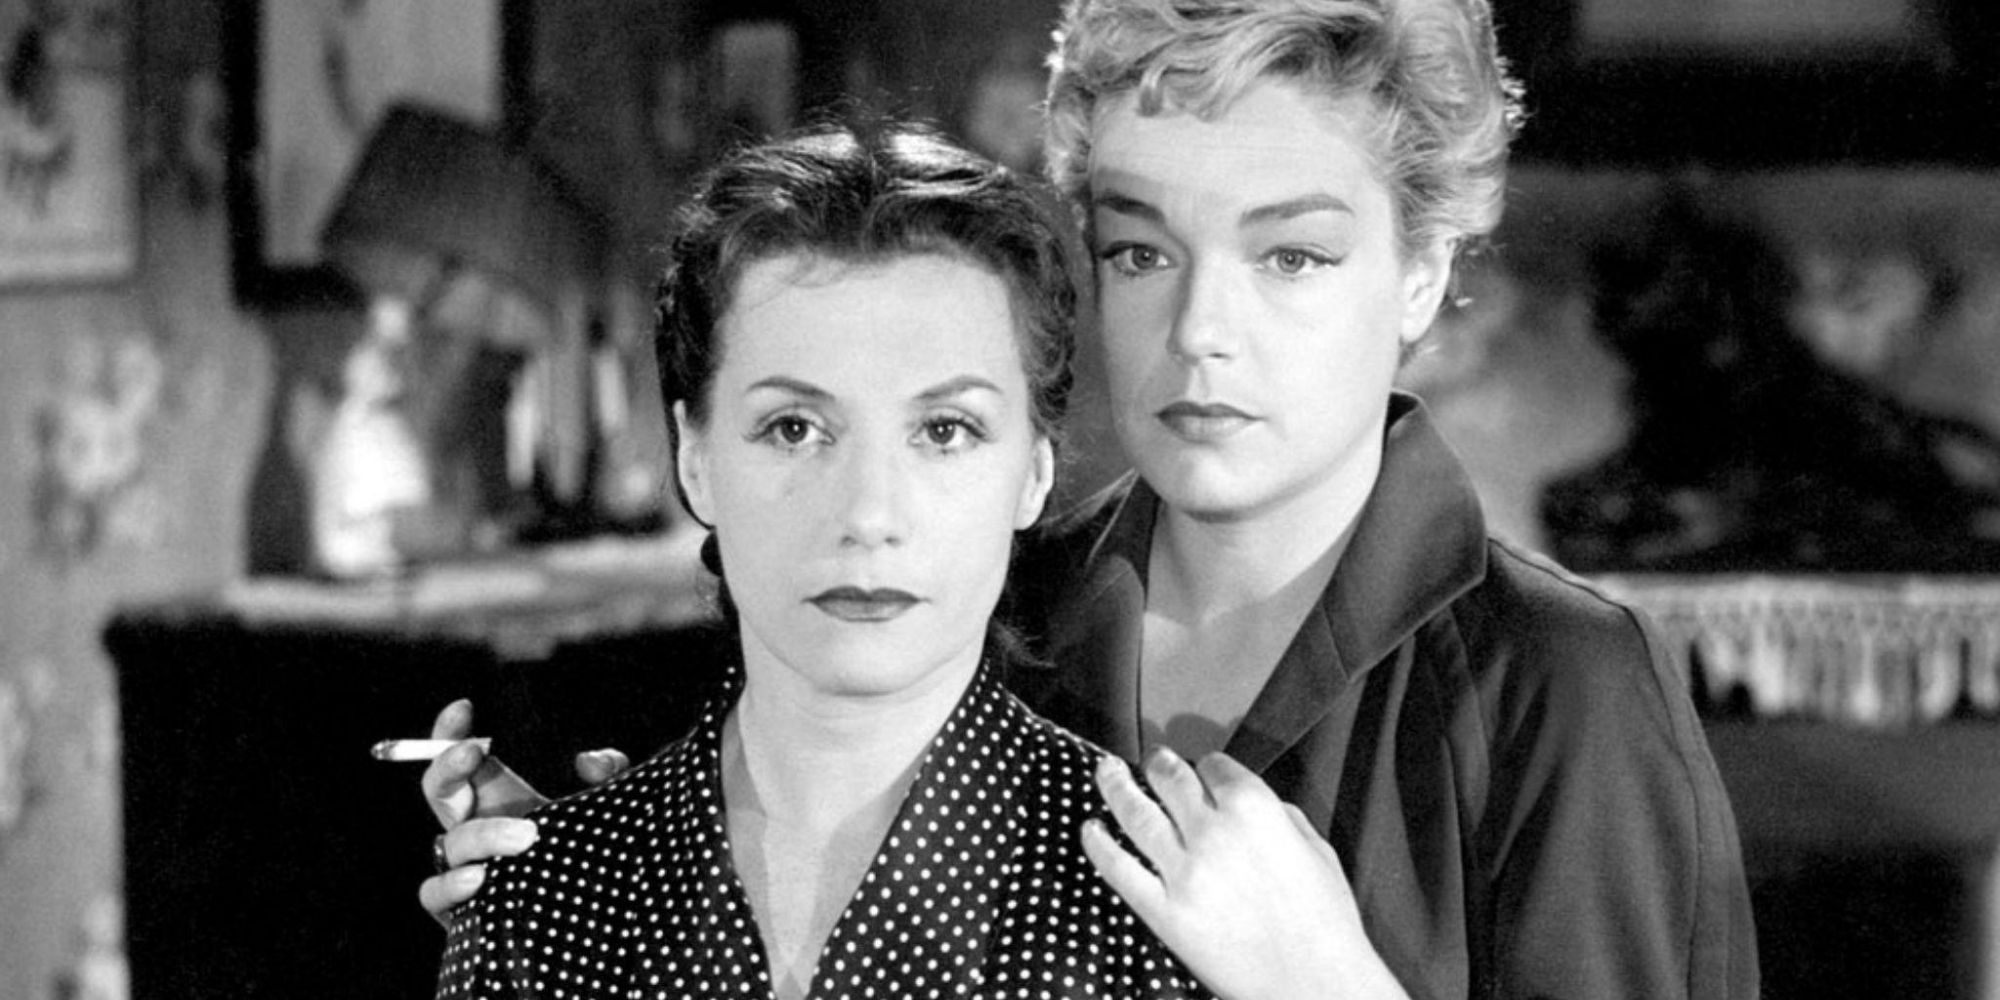 Vera Clouzot and Simone Signoret as Christina and Nicole standing close to each other in Diabolique (1955)